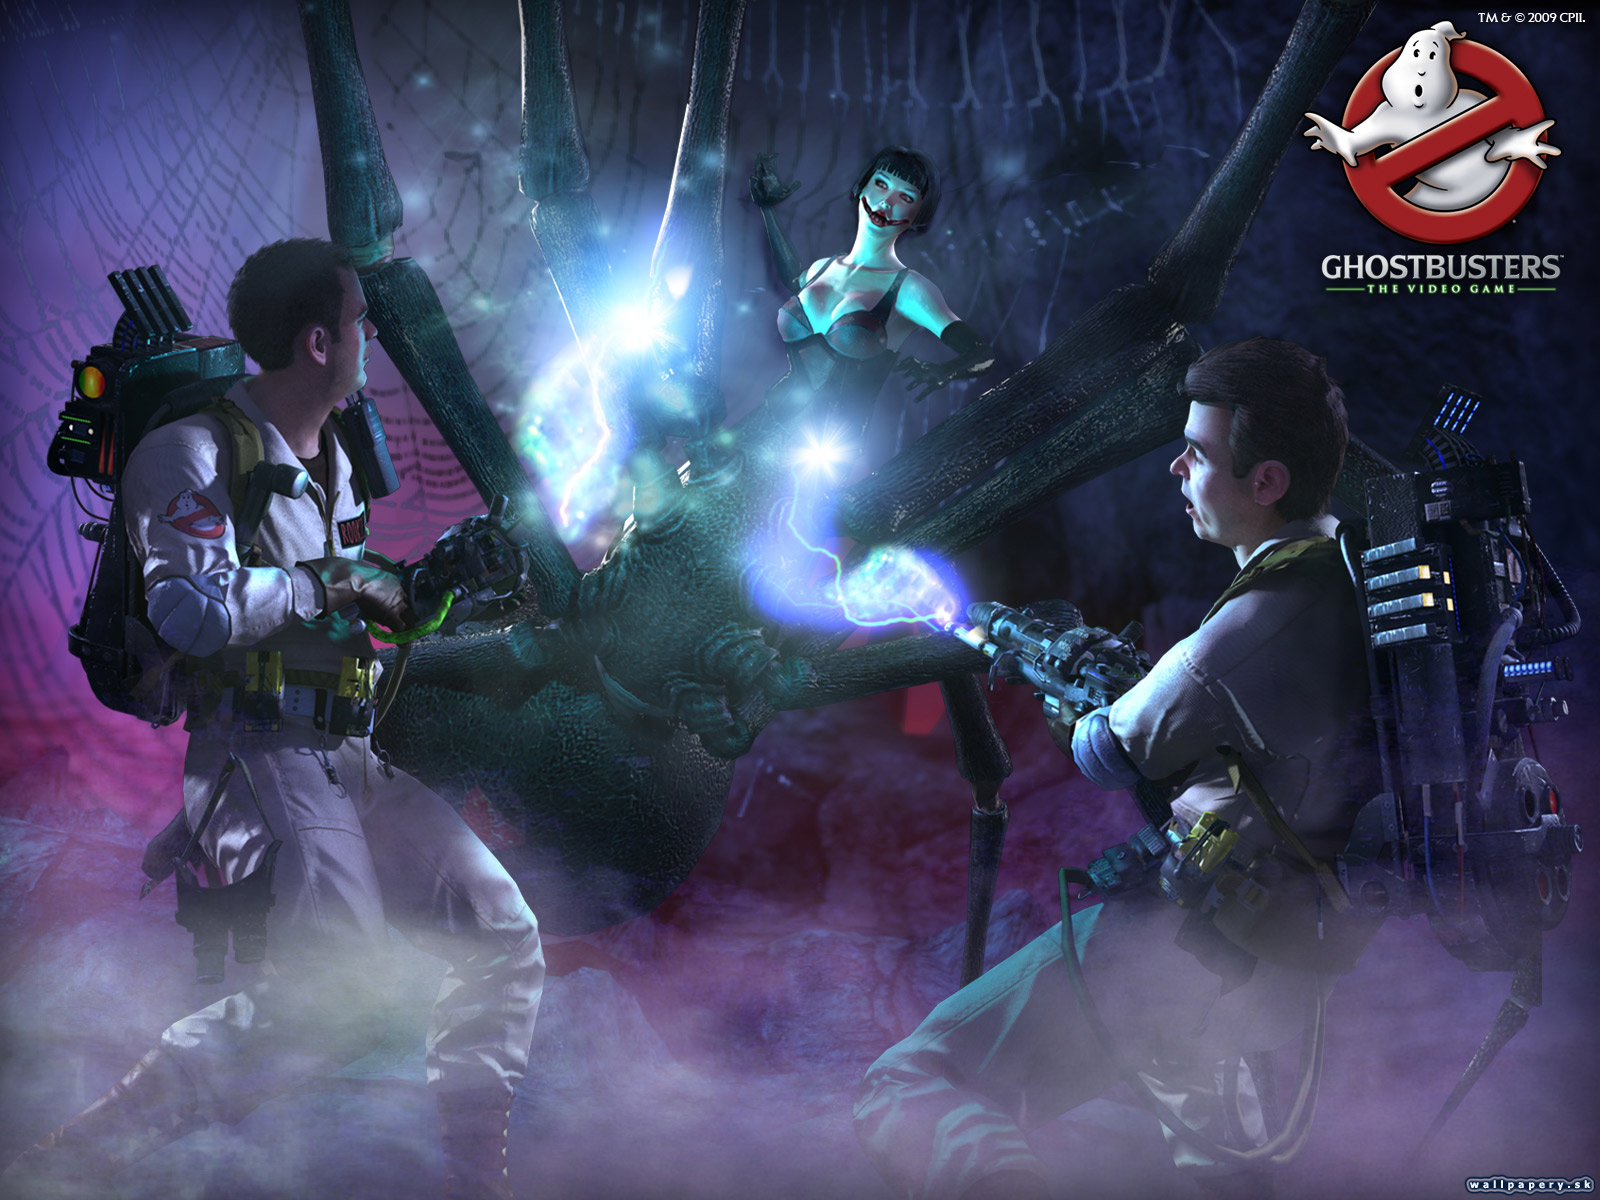 Ghostbusters: The Video Game - wallpaper 3